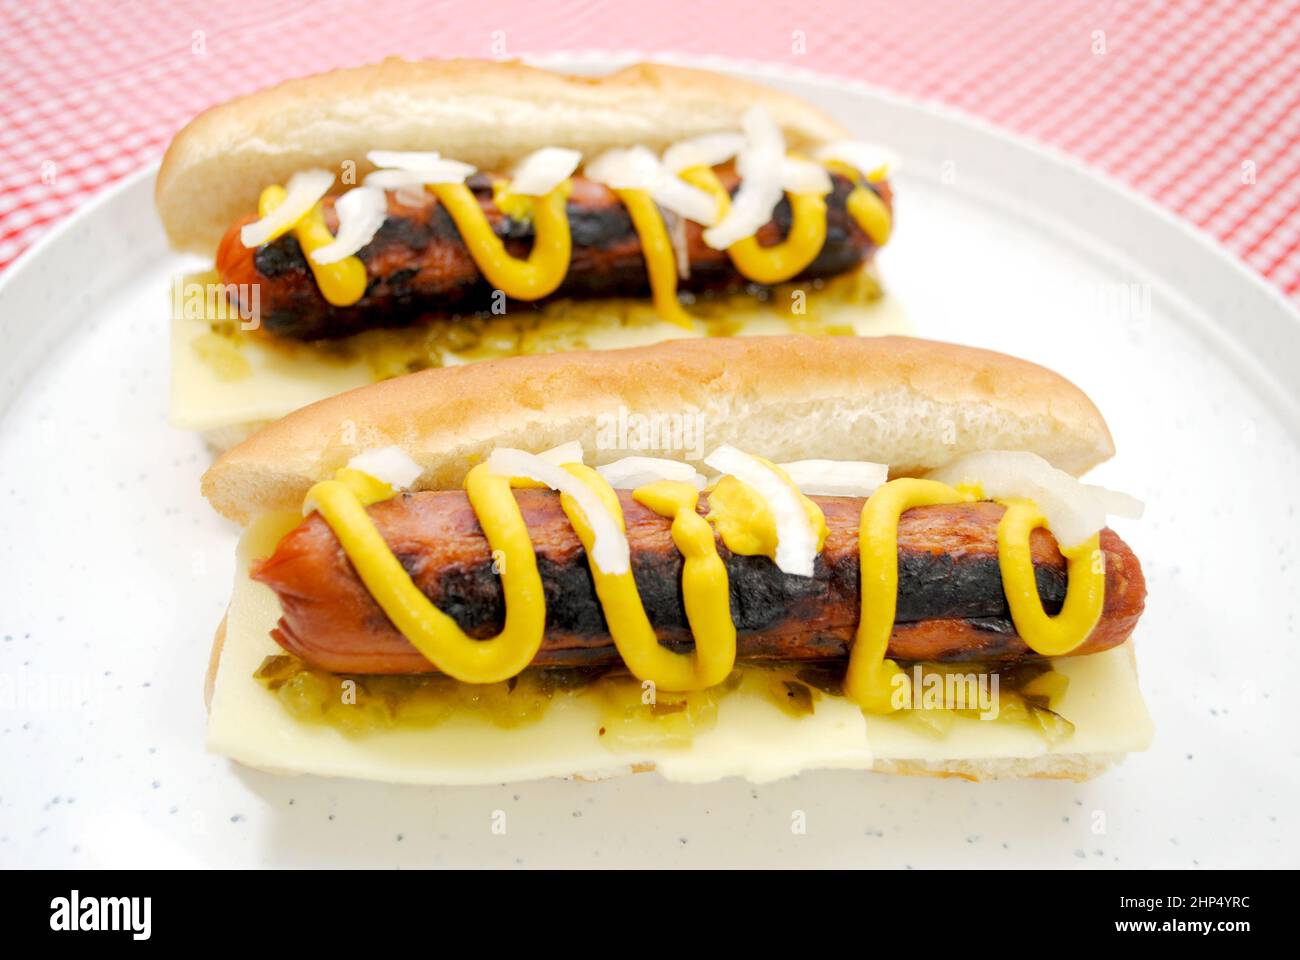 Hot Dogs with Onions, Relish and Mustard on a Plate Stock Photo